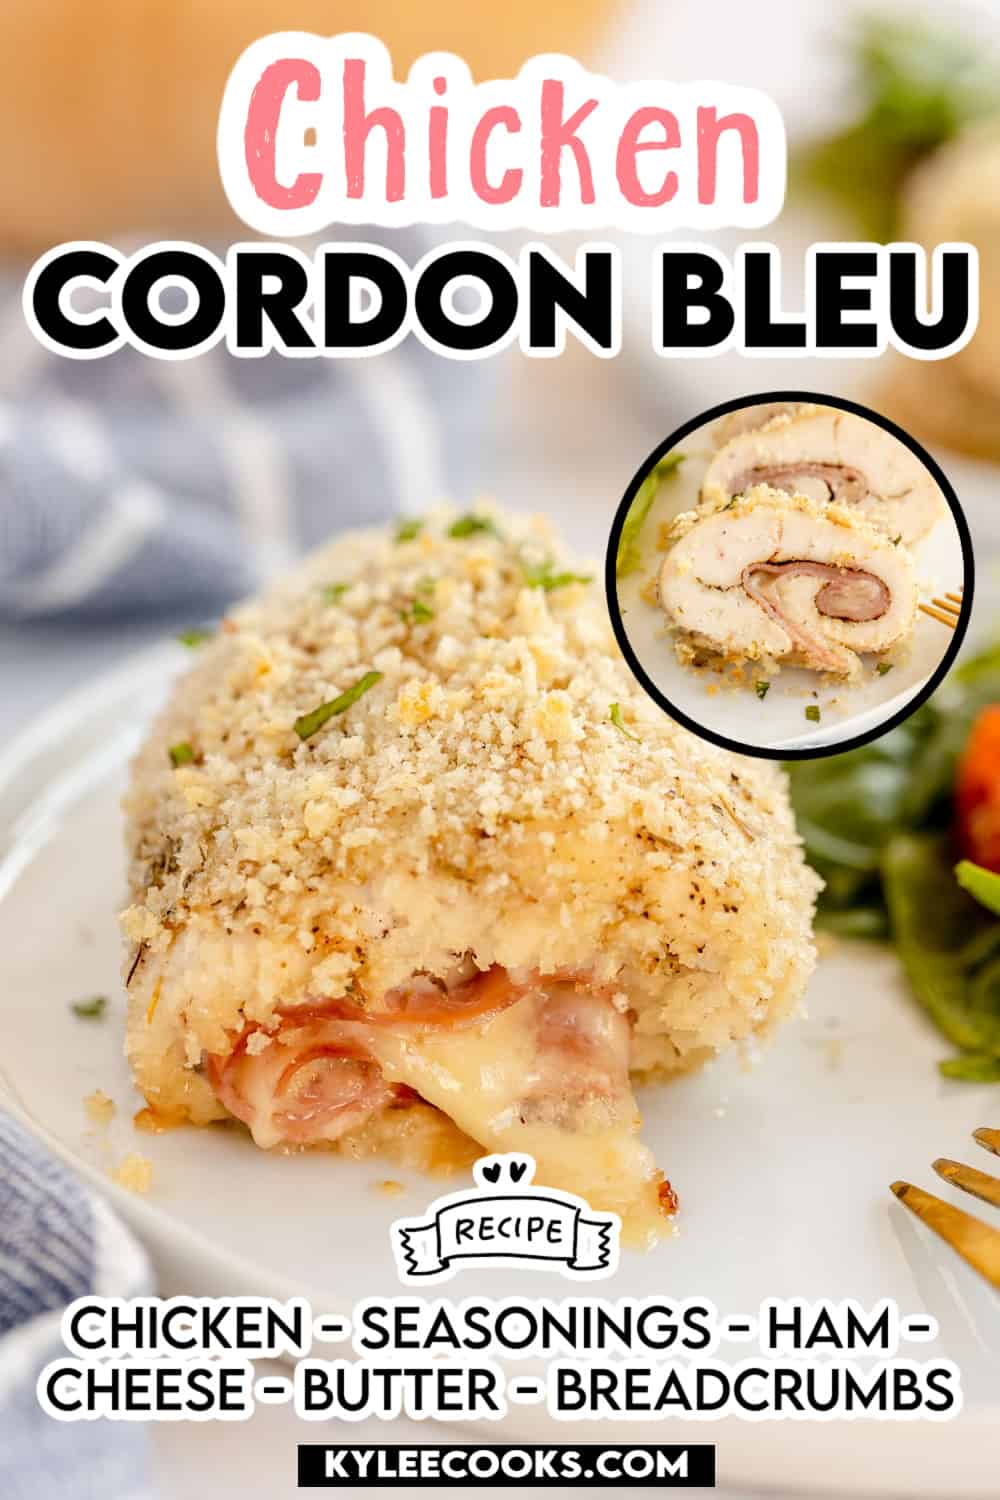 Chicken cordon bleu with salad on a white plate with recipe name and ingredients overlaid in text.